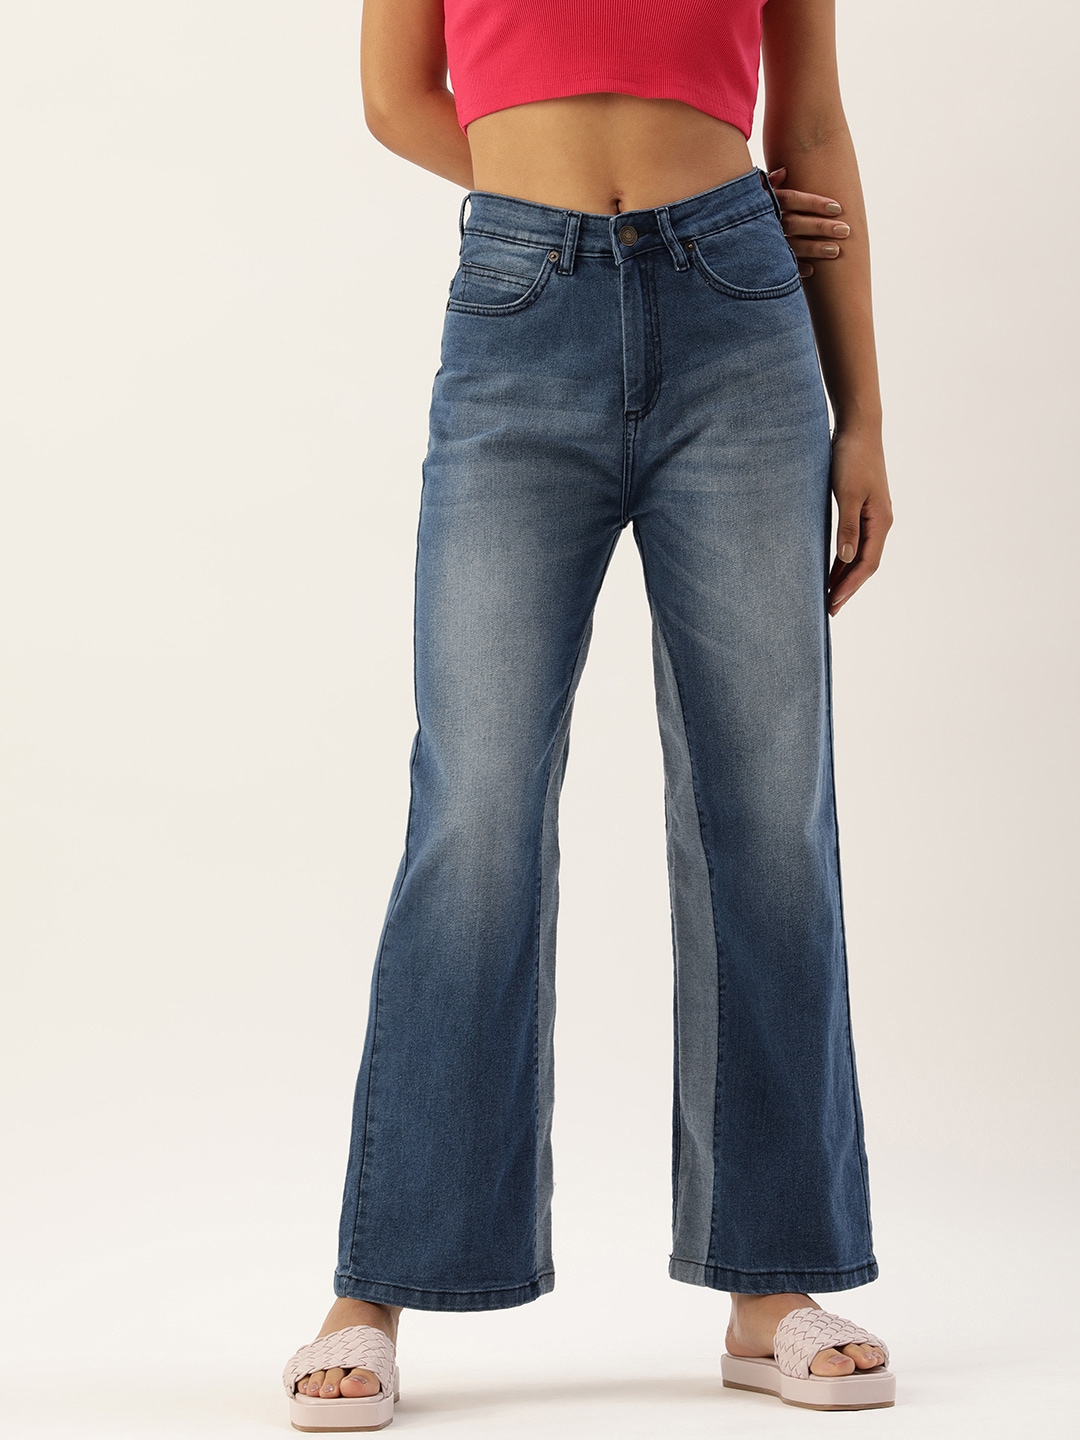 FOREVER 21 Women Blue Light Fade Stretchable Jeans Price in India